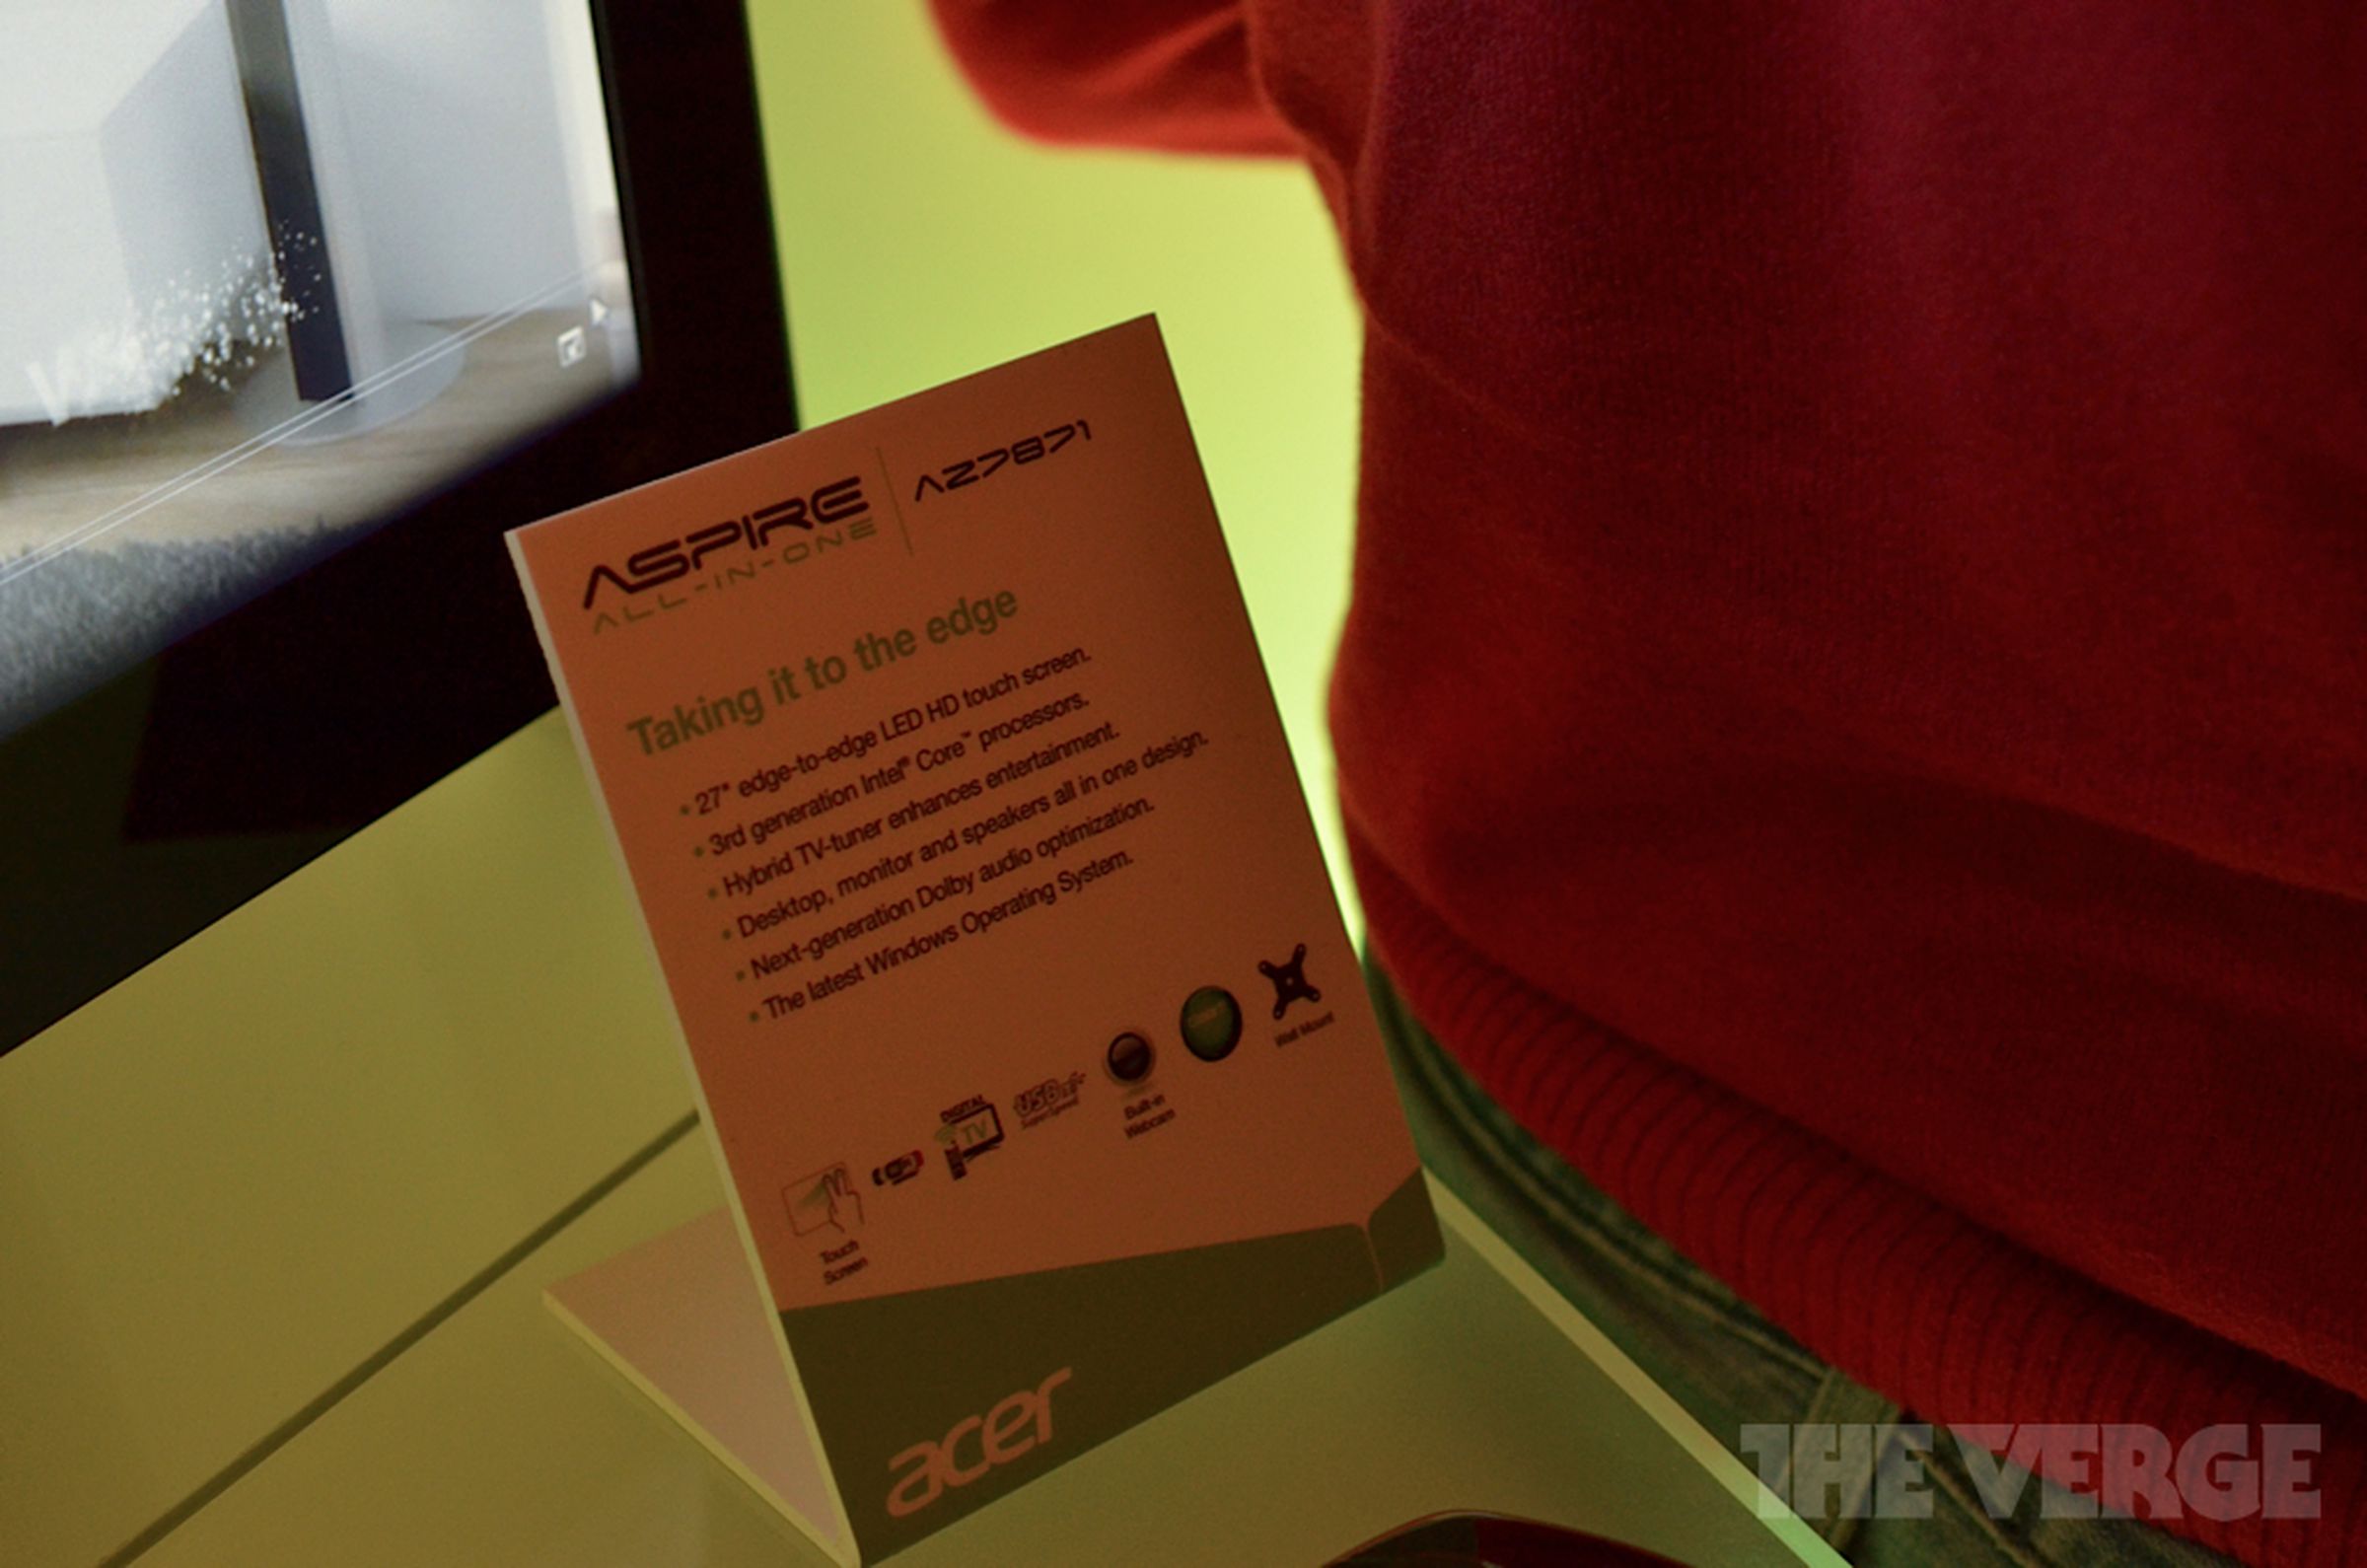 Acer Aspire Z7871 AIO hands-on pictures